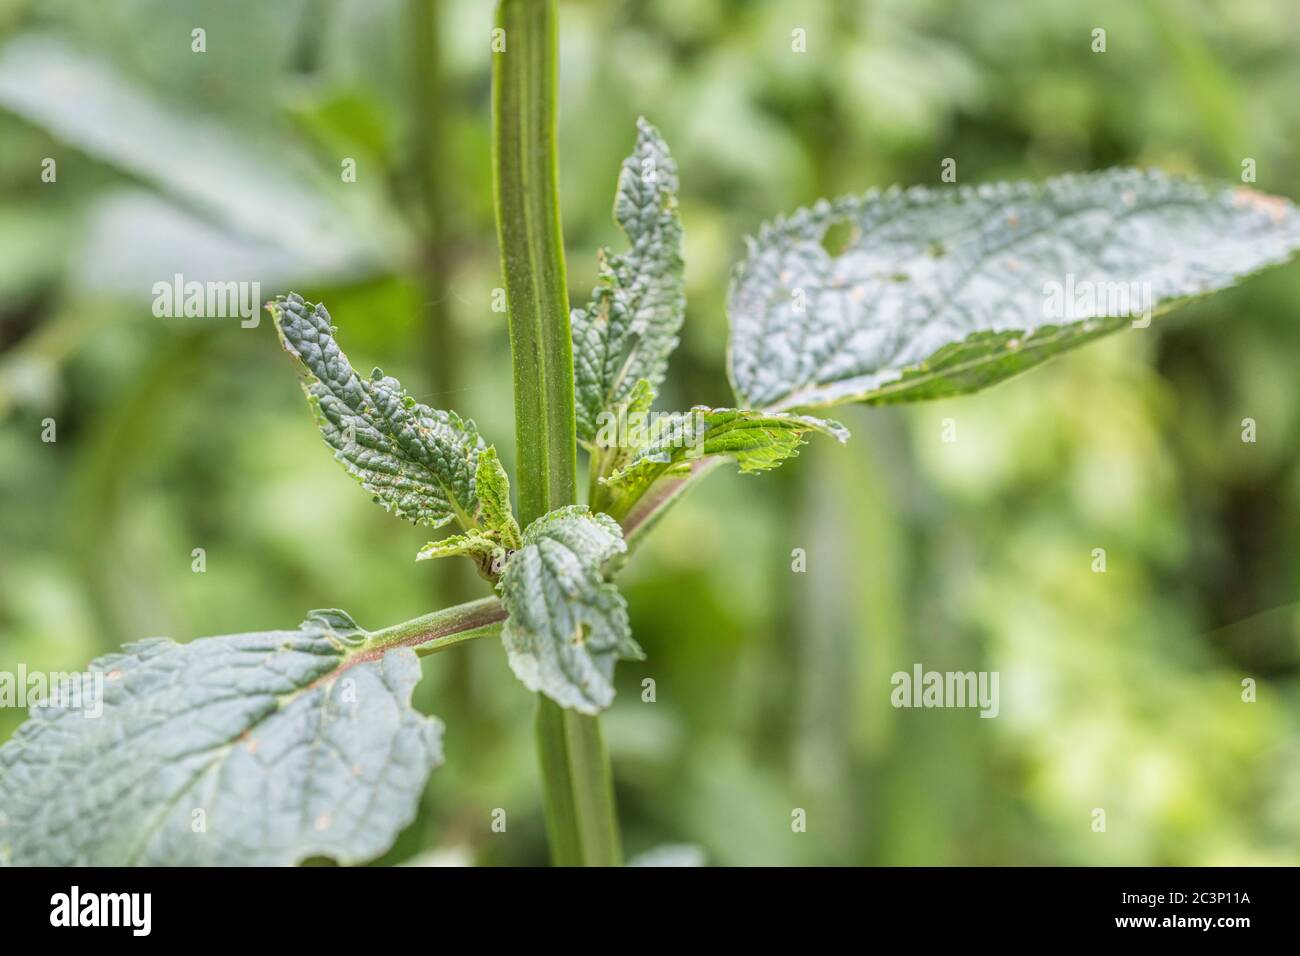 Winged square stem and leaves of Water Figwort / Scrophularia aquatica. Species likes wet and moist habitats. Medicinal plant used in herbal cures. Stock Photo